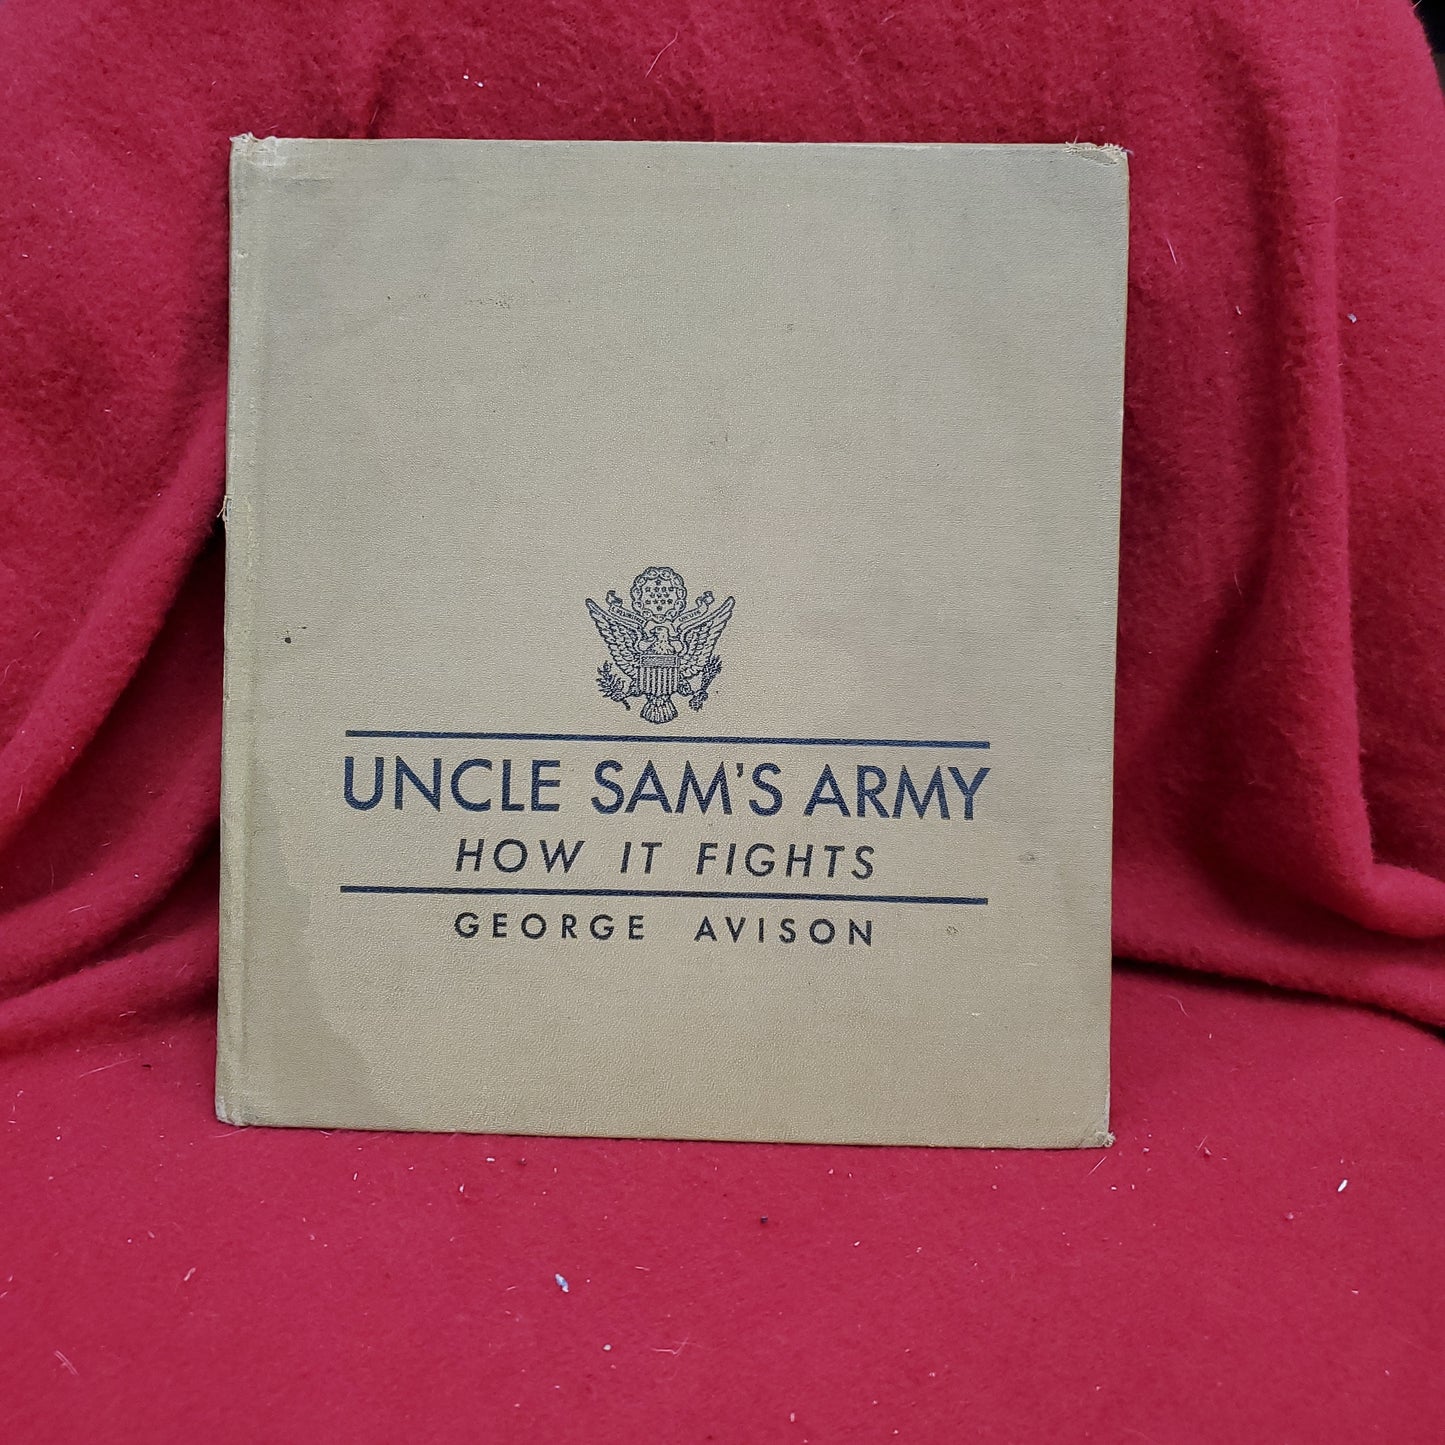 Vintage 1943 Uncle Sam's Army HOW IT FIGHTS by George Avison (27s)